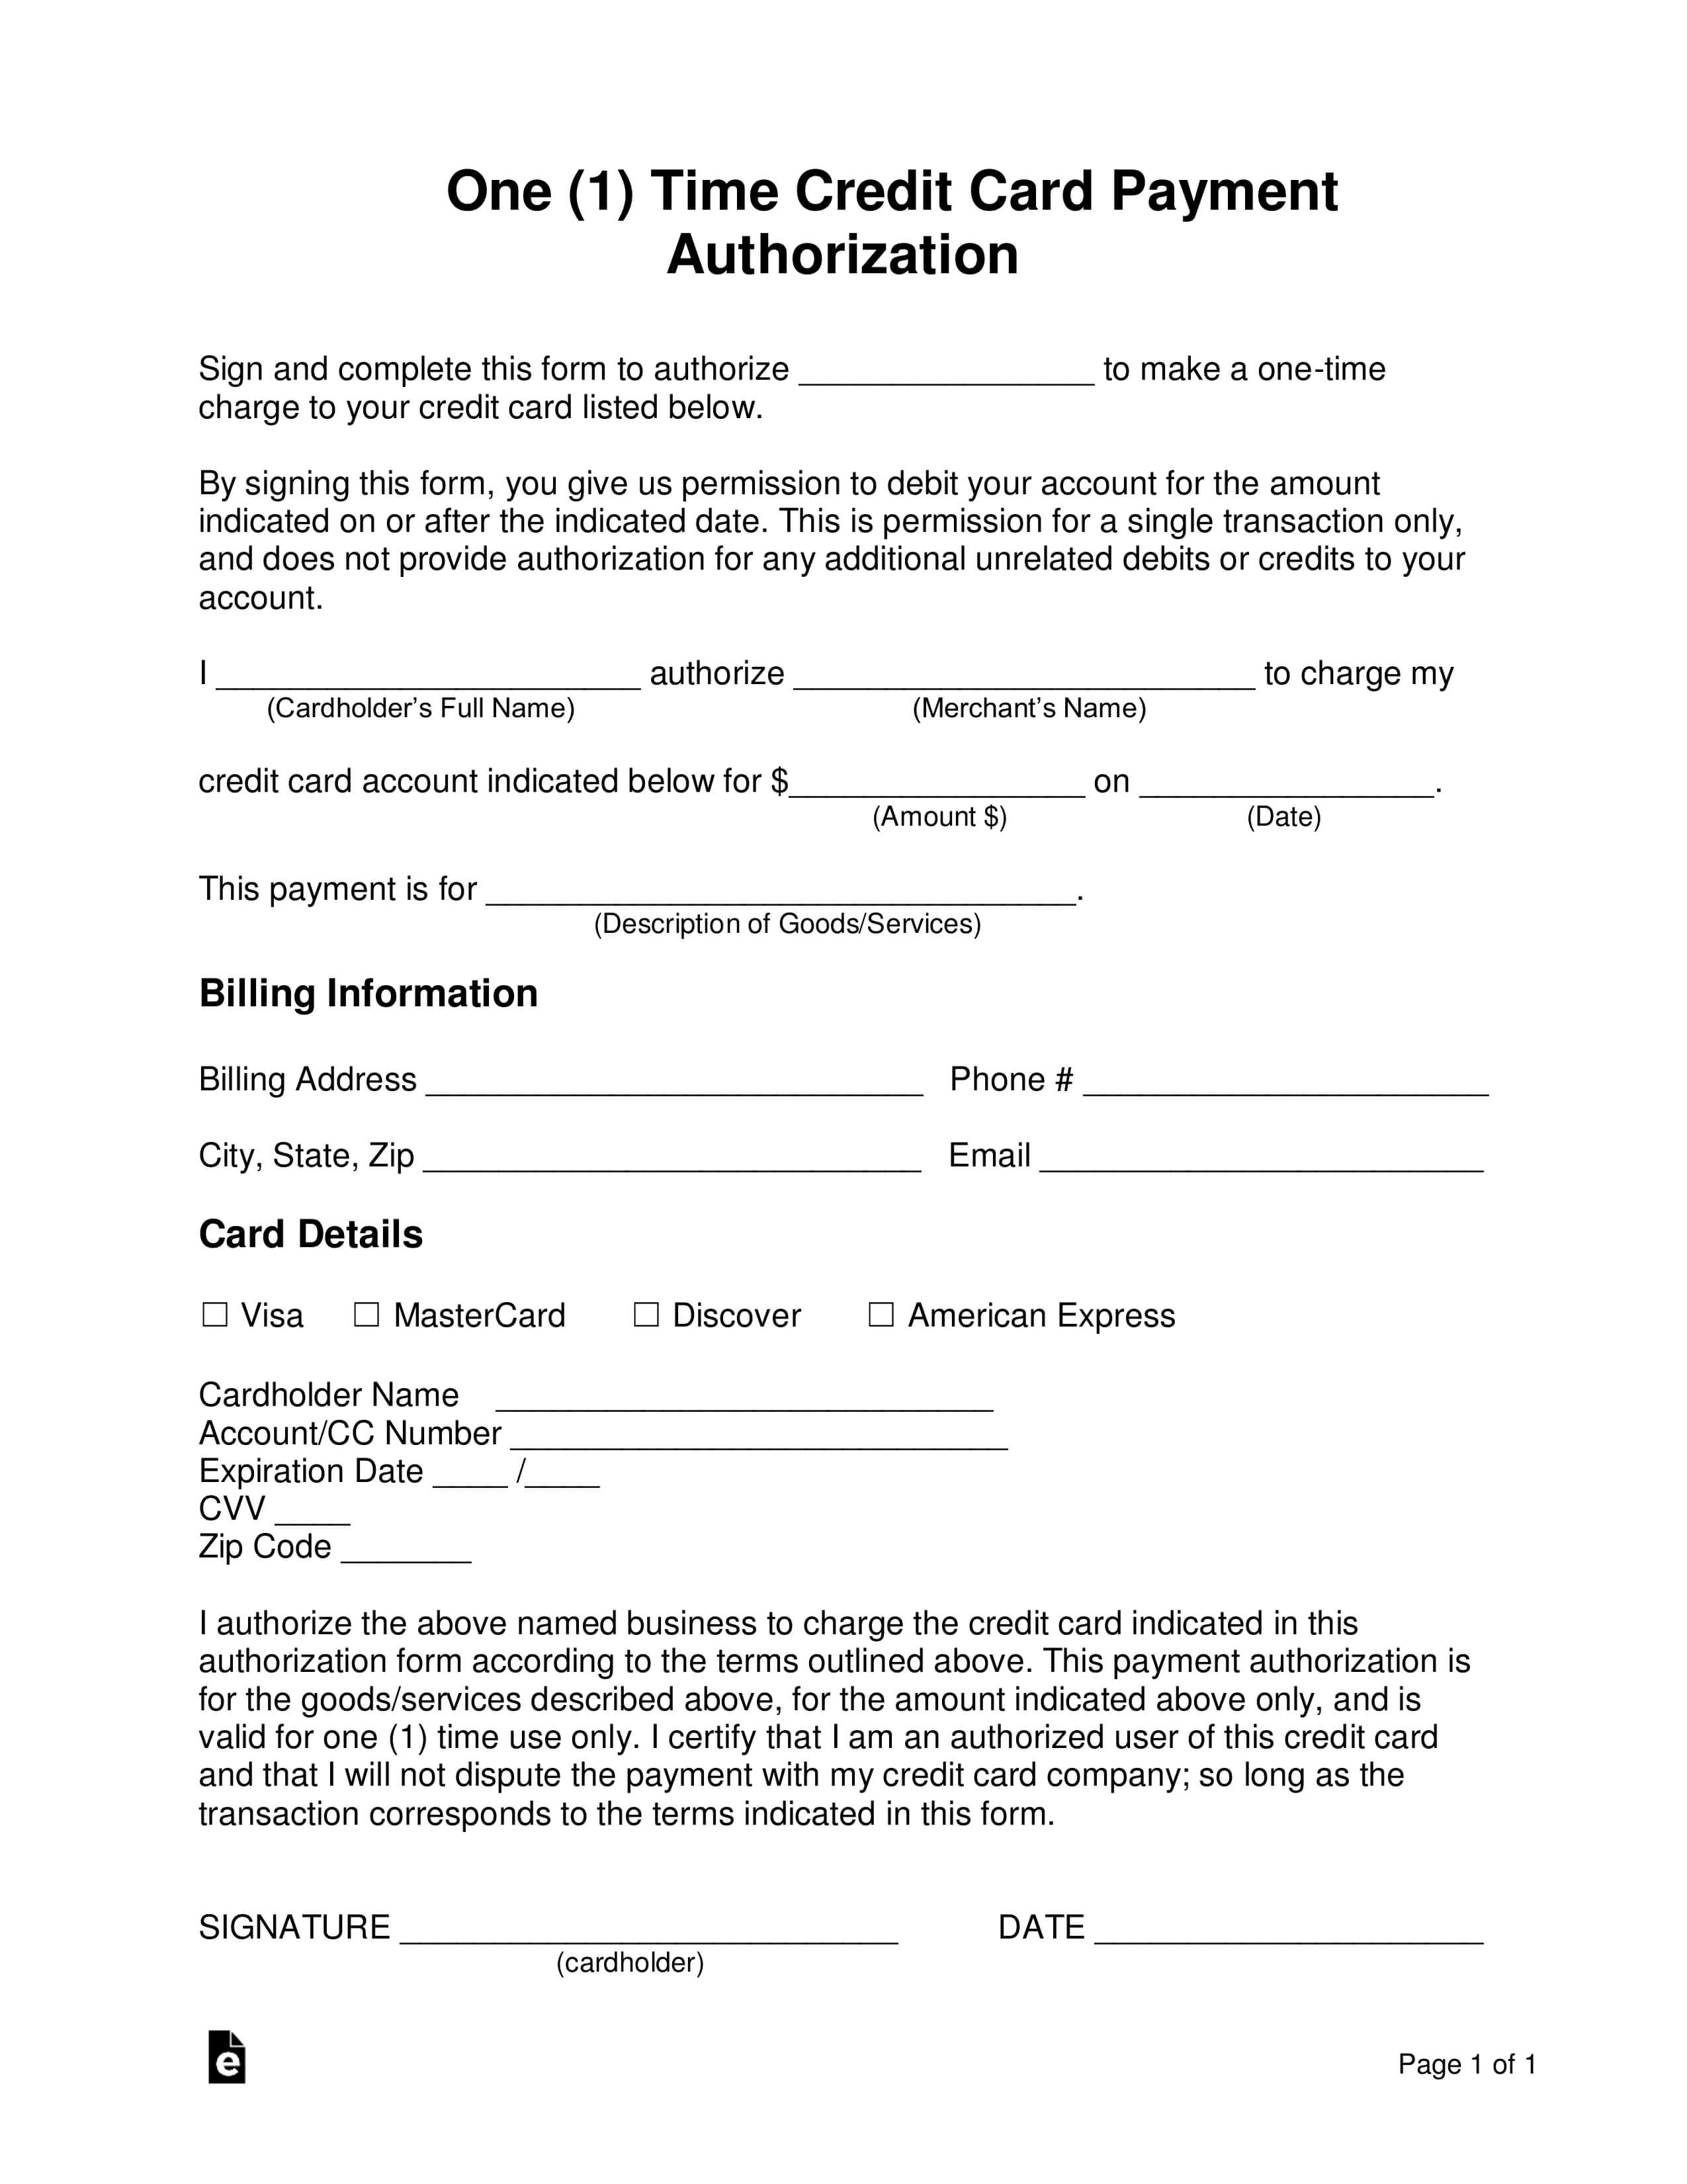 Free One (1) Time Credit Card Payment Authorization Form For Credit Card Payment Form Template Pdf